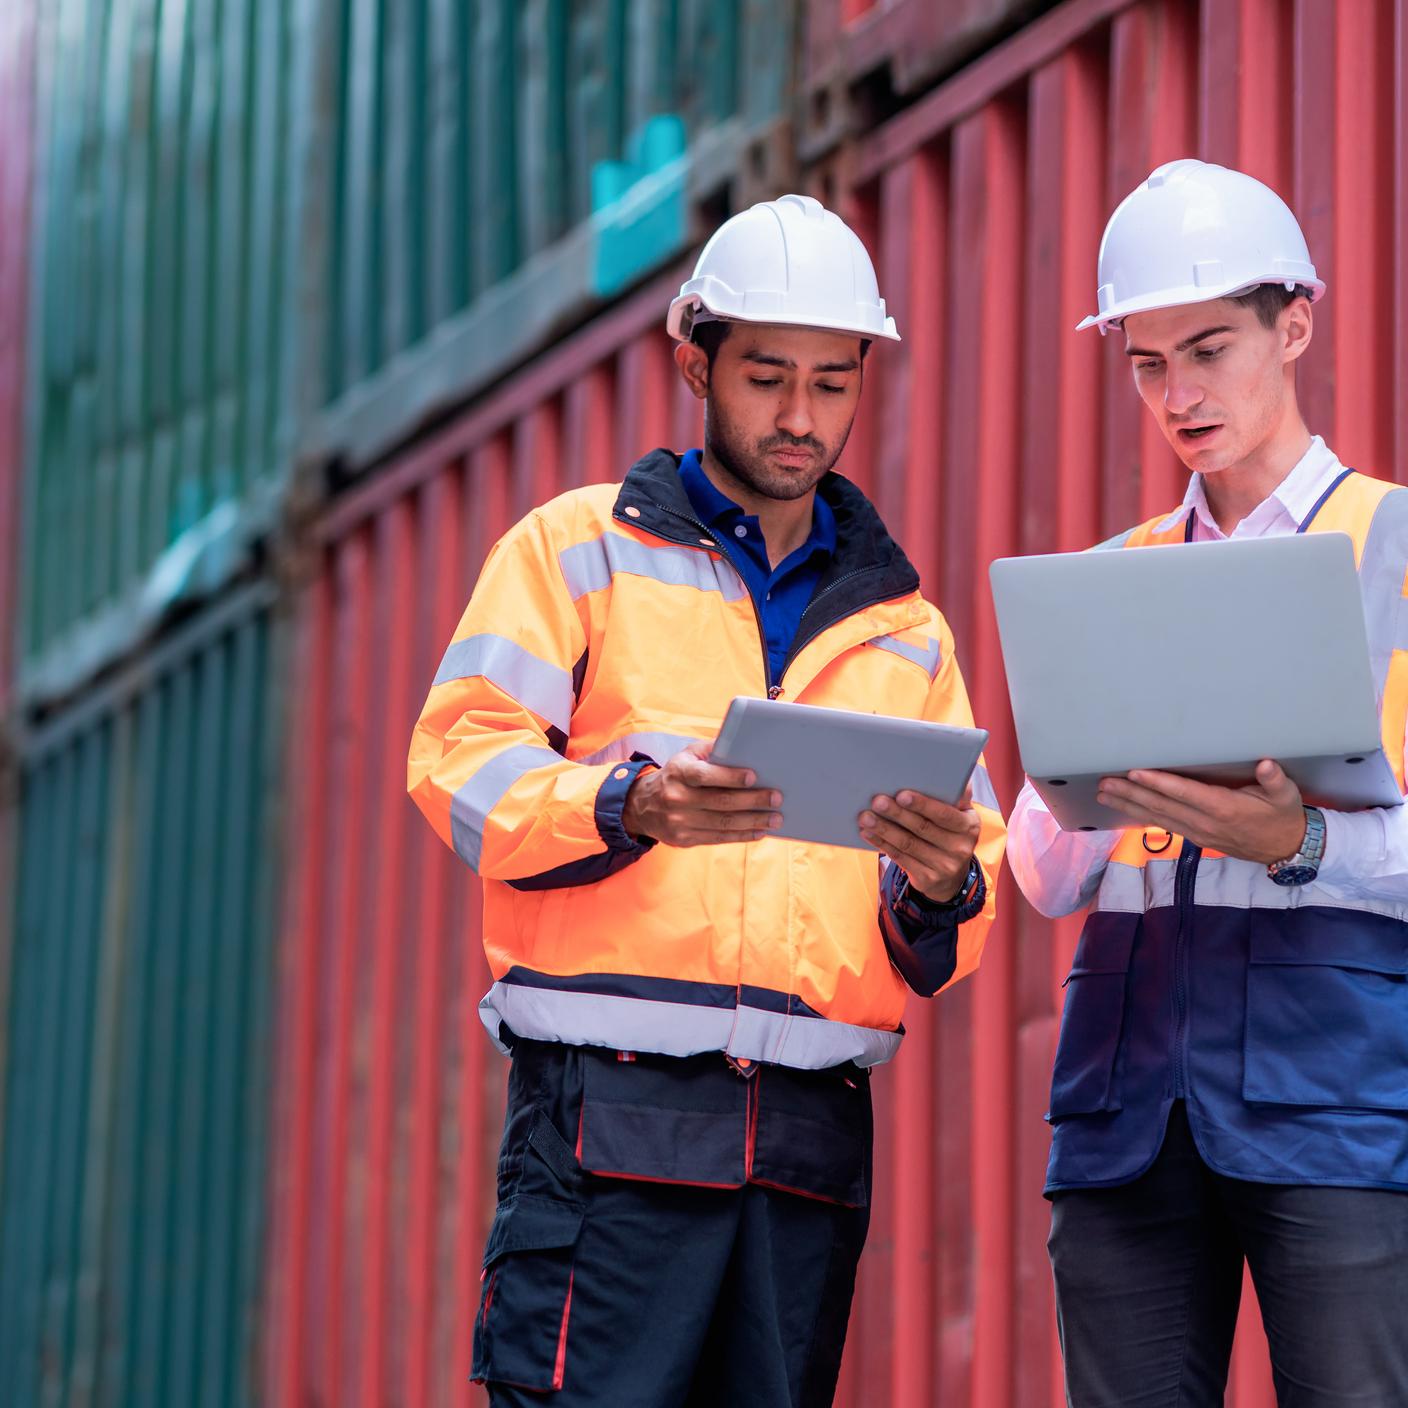 Supply Chain - Male Dock worker holding a tablet computer and explaining to a supervisor